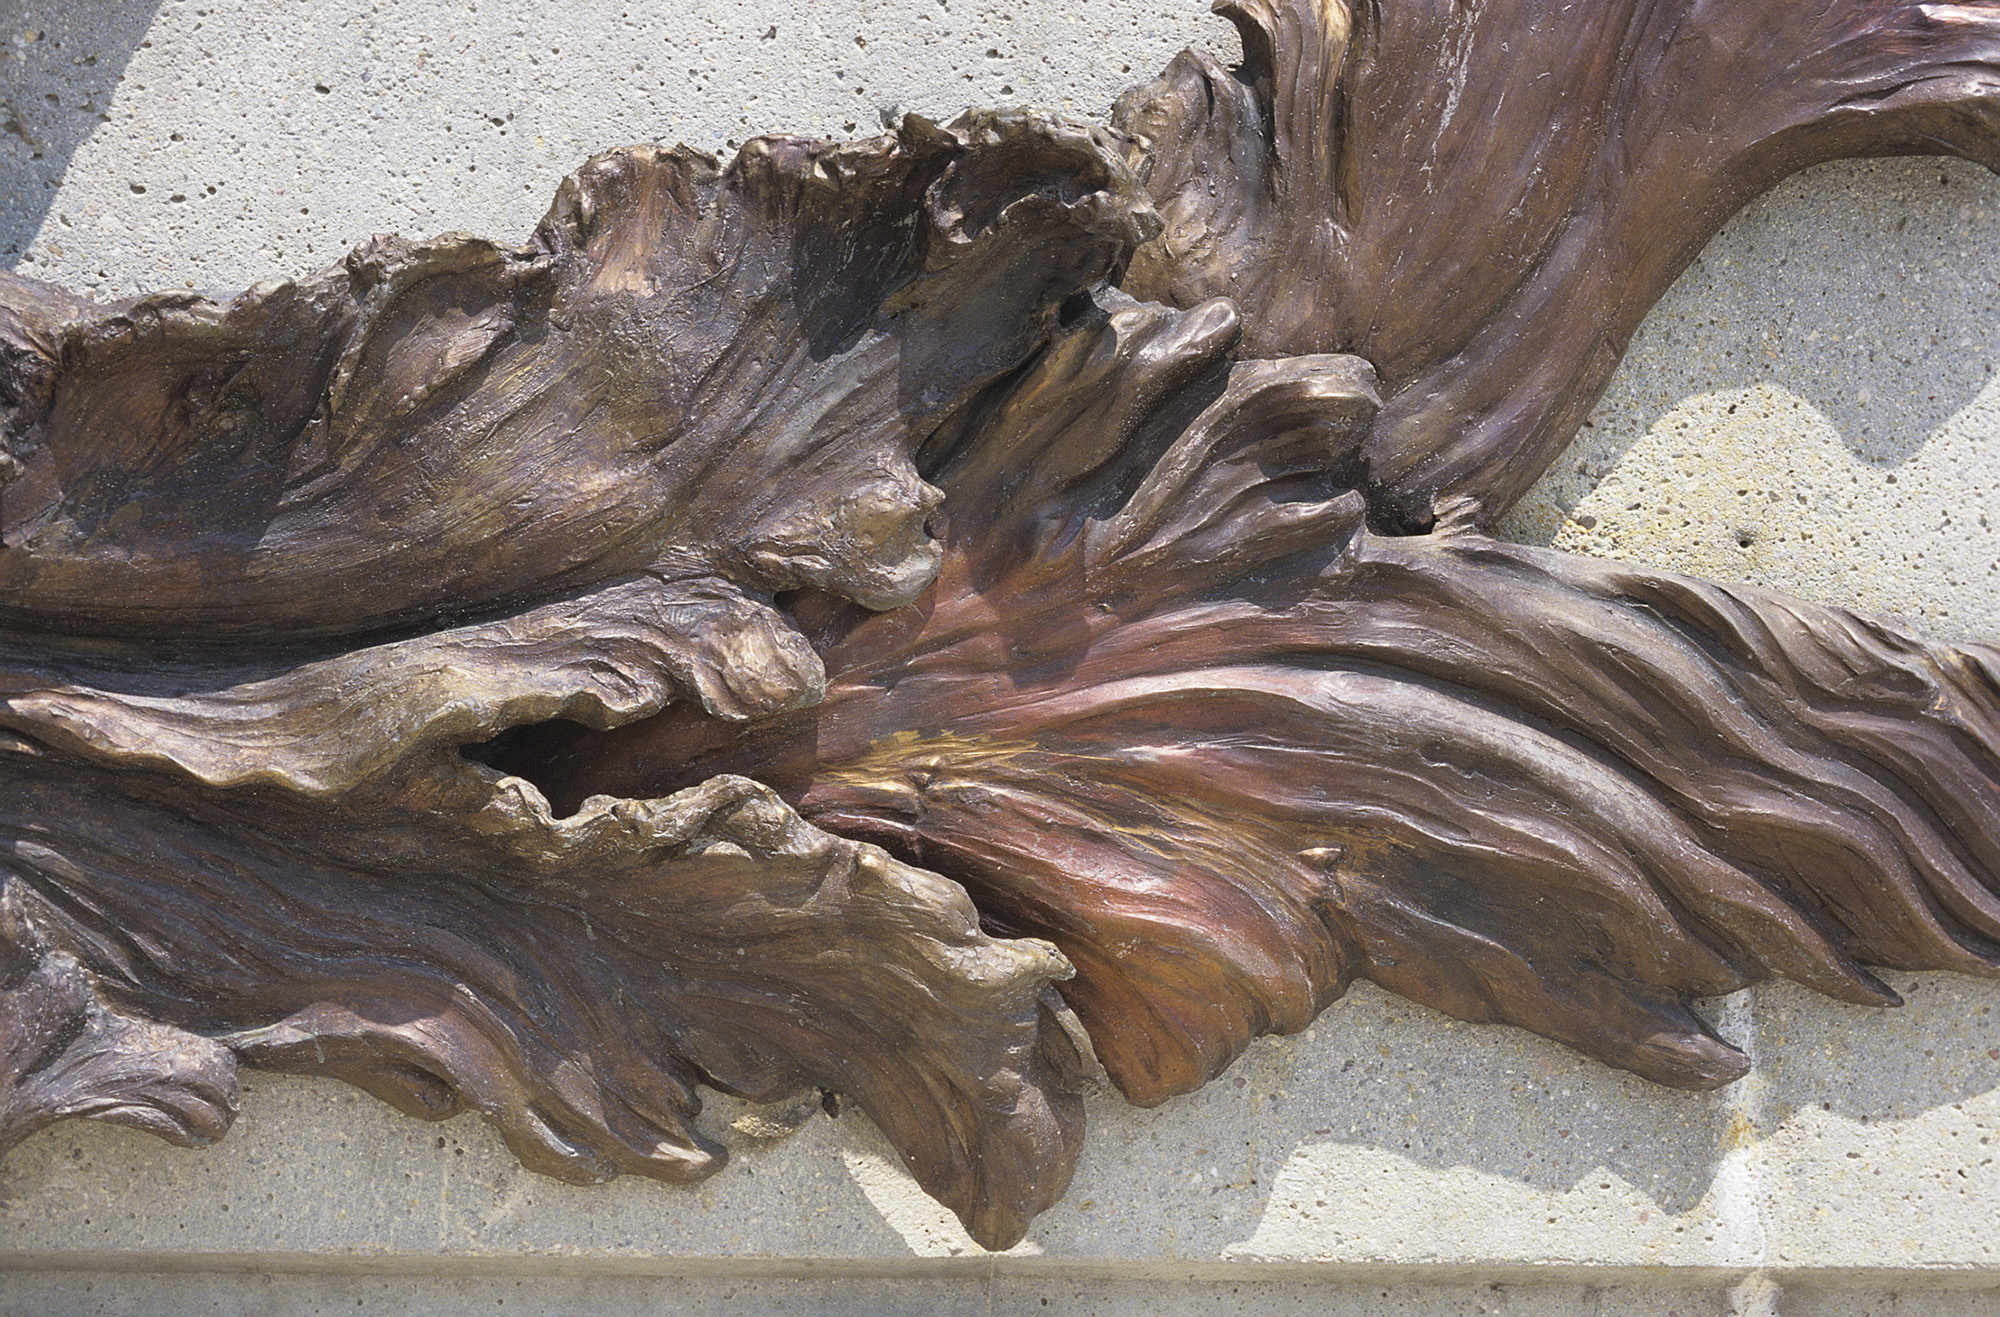   Floodwaters , bronze detail. The bronze has a complex hot patina using ferric oxide, liver of sulphur, and other acids, finished with a hot wax and buffed. This&nbsp; gives it its variegated, shifting colors.   